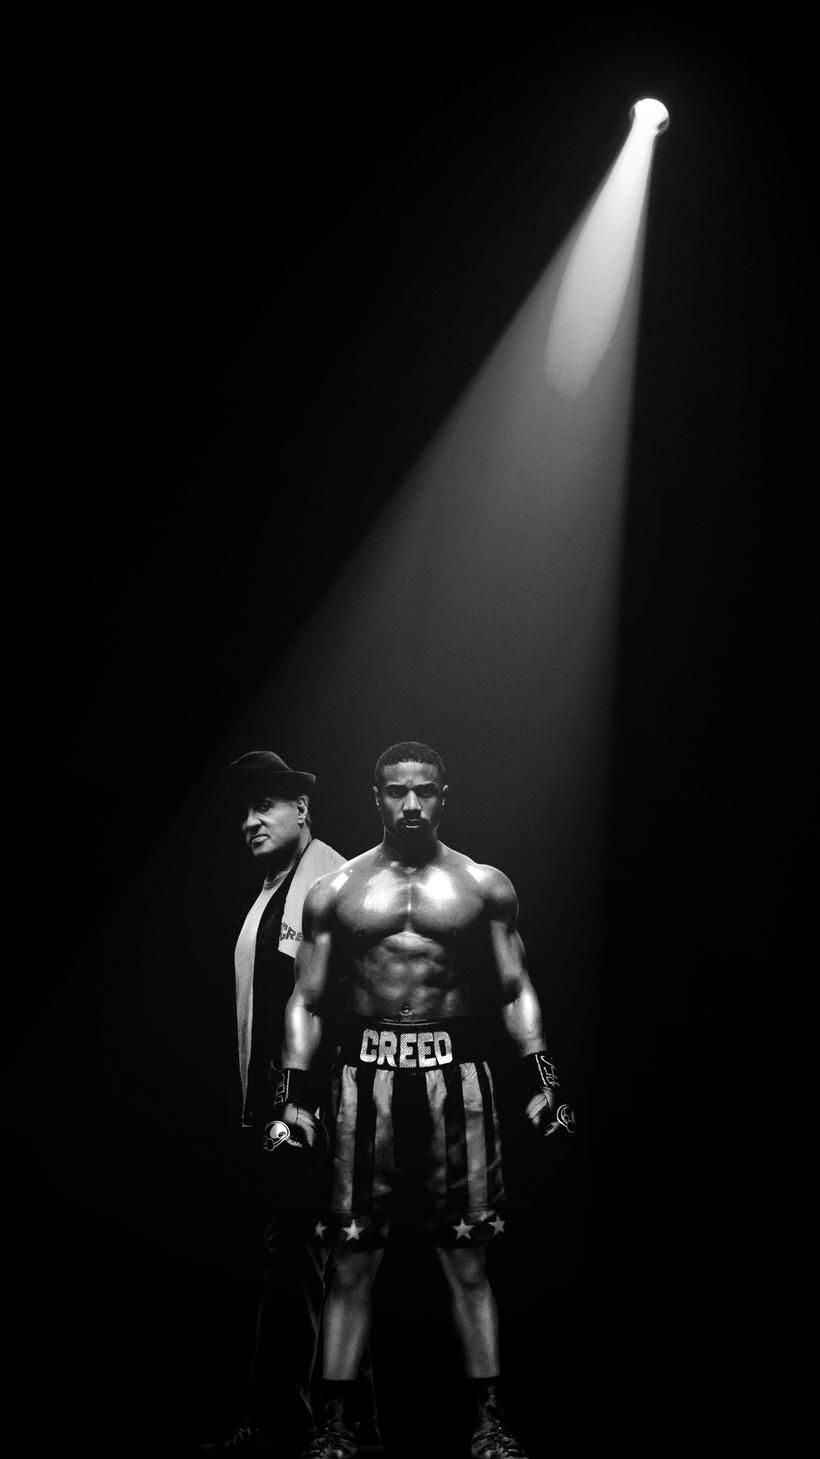 Creed Wallpapers